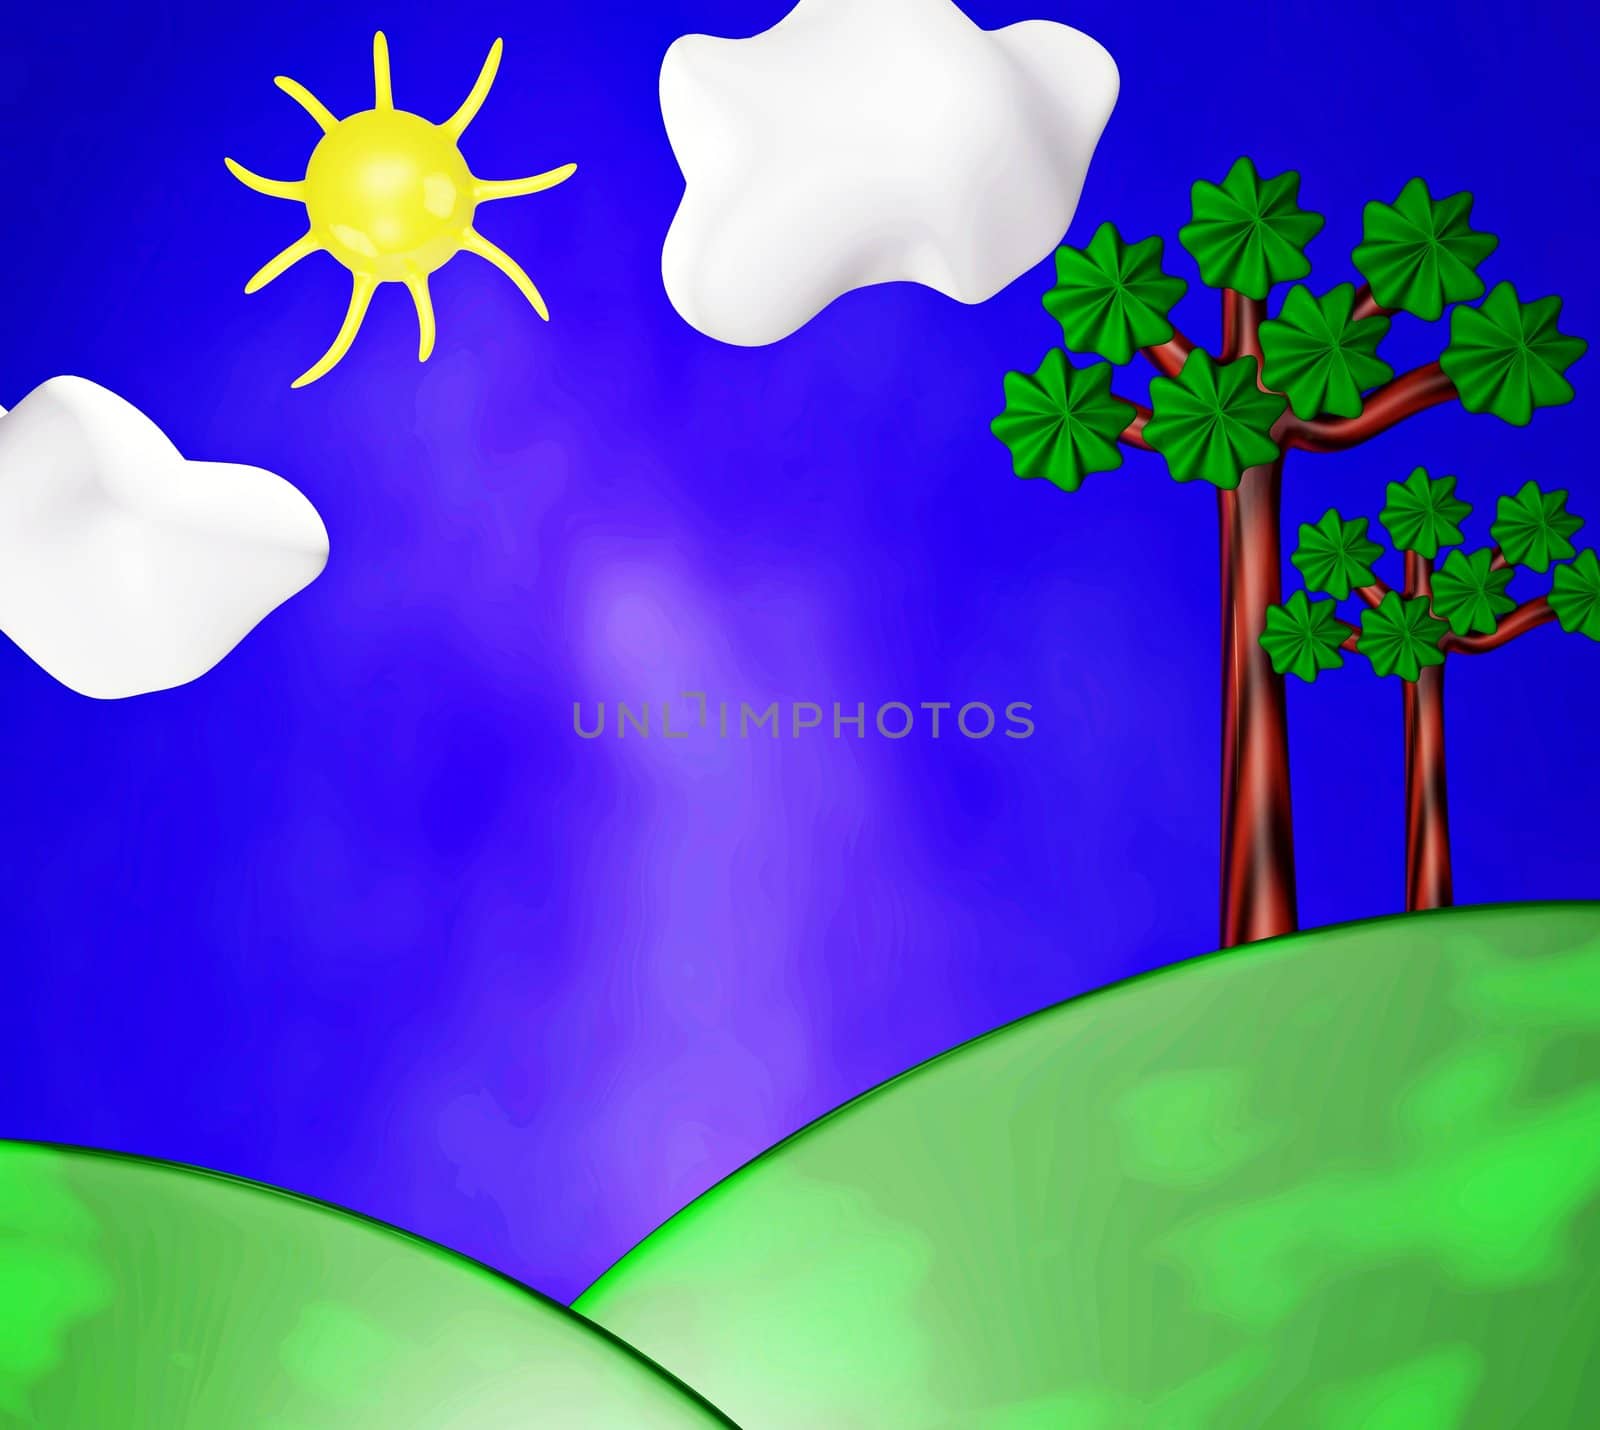 A 3D Nature scene with sun, clouds, hills, sky and trees